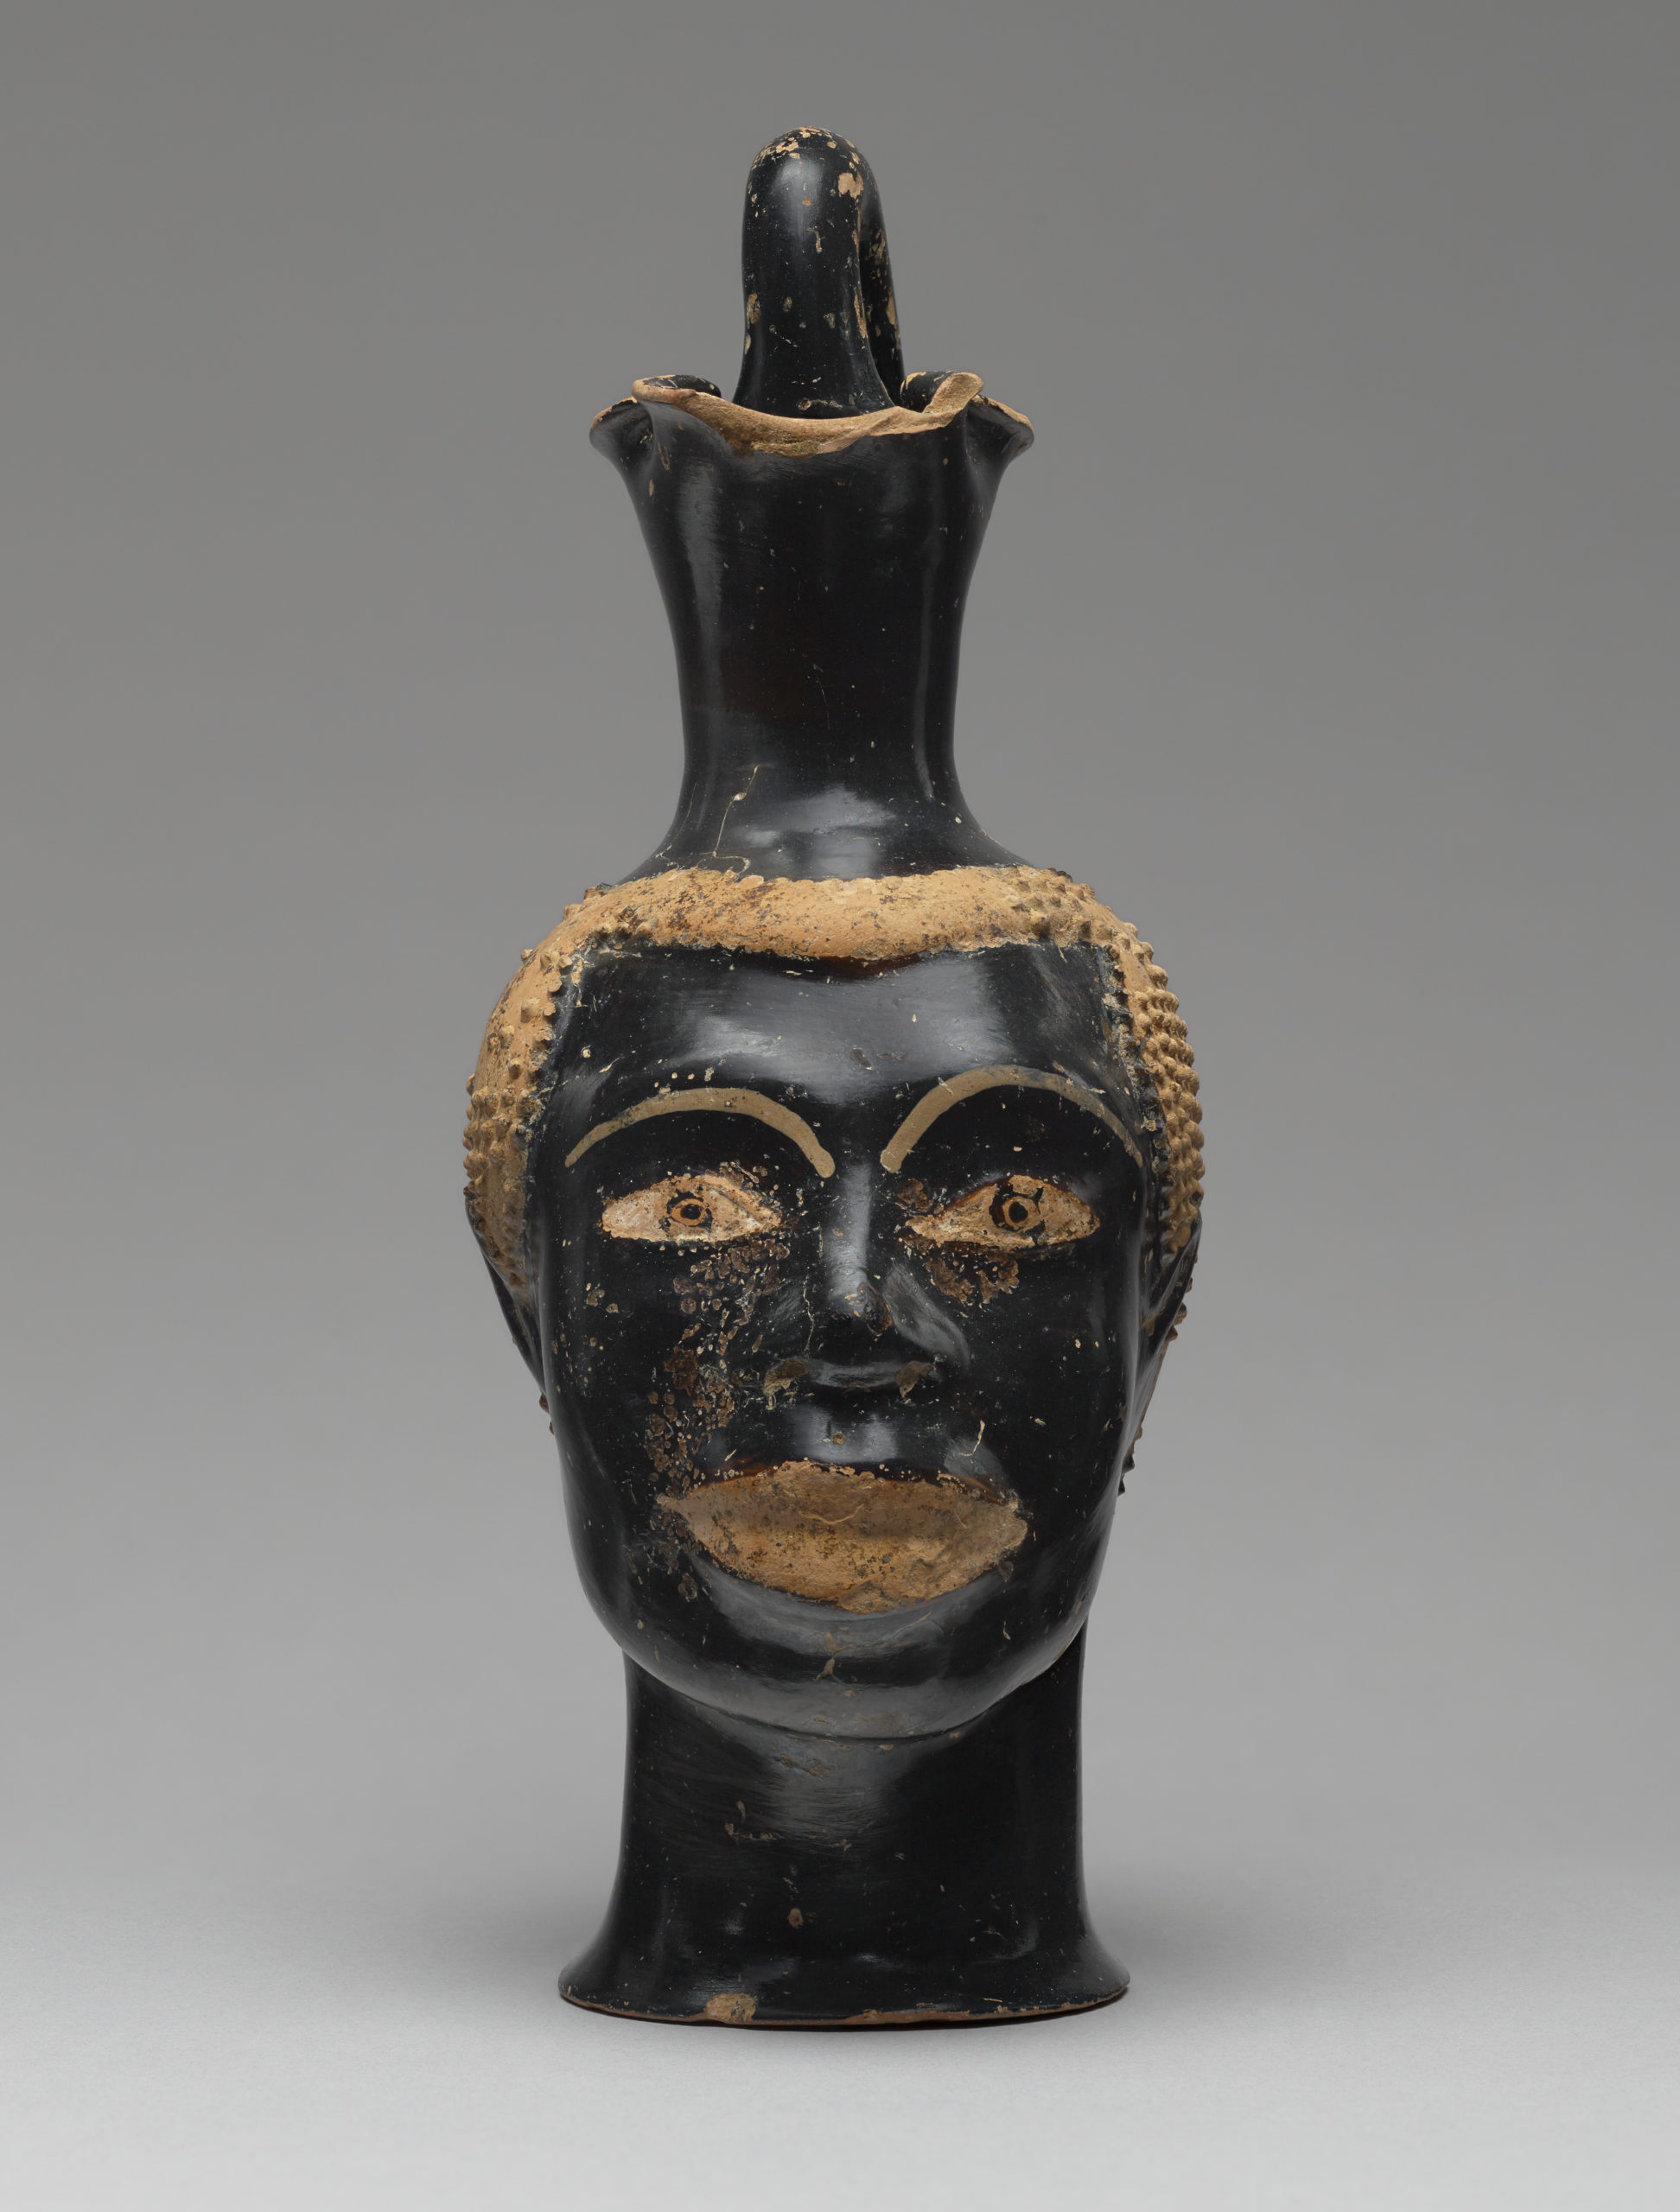 Pitcher (Oinochoe) in the Form of the Head of an African, about 510 B.C.E., attributed to Class B bis: Class of Louvre H 62. Terracotta, 8 7/16 inches high (The J. Paul Getty Museum, 83.AE.229. Digital image courtesy of the Getty’s Open Content Program)